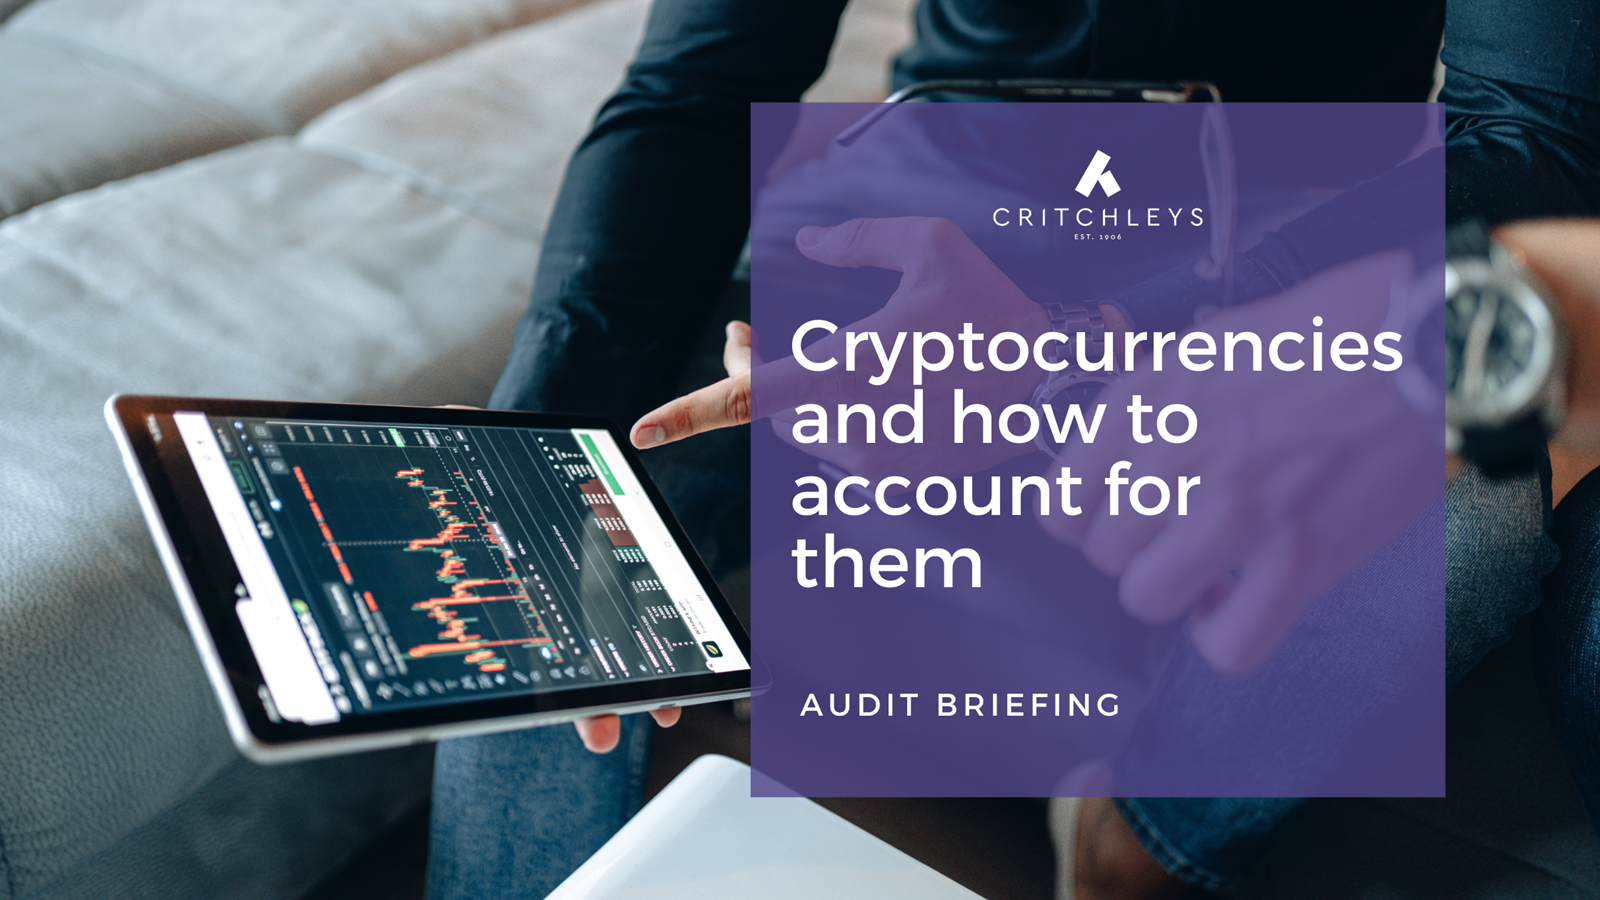 Cryptocurrencies and how to account for them